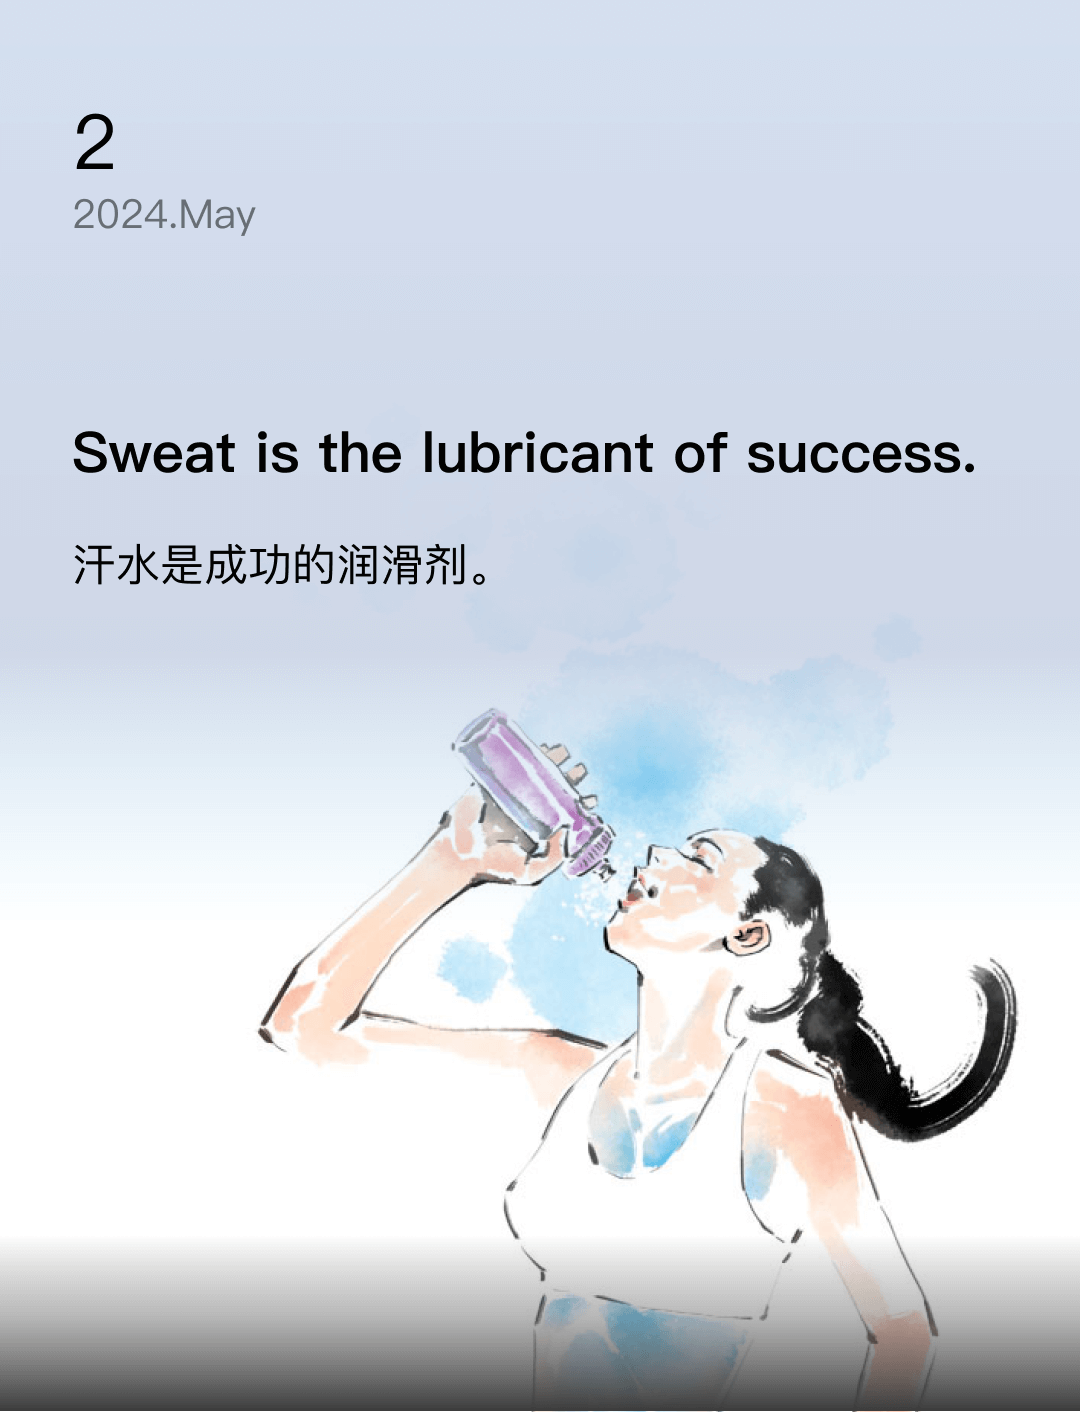 Sweat is the lubricant of success.